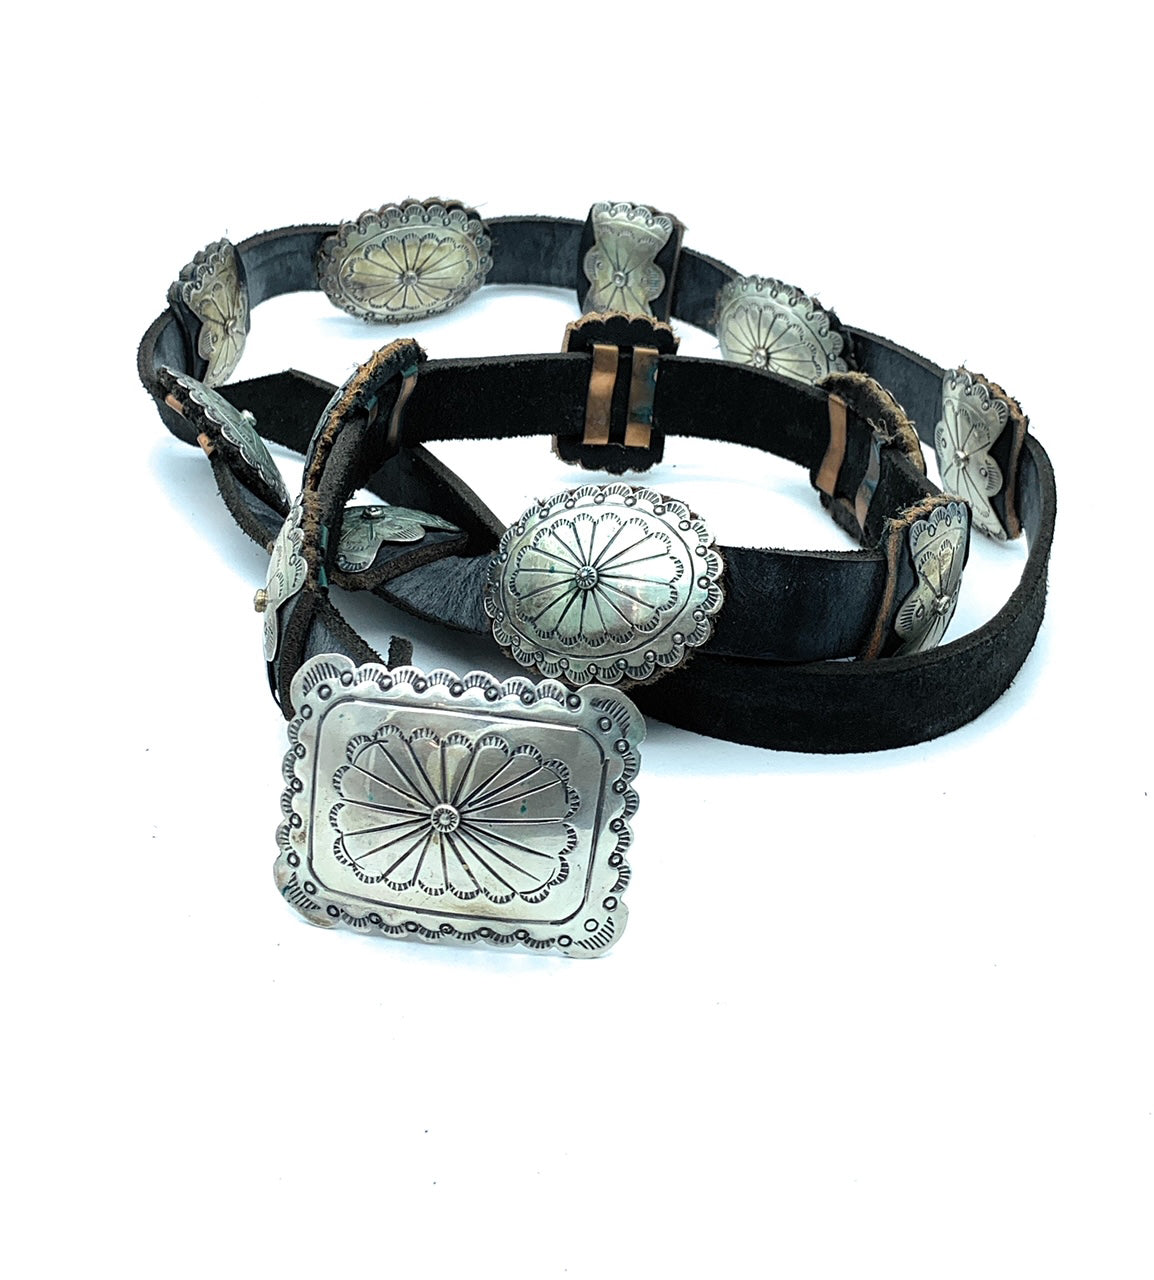 How to attach a leather and silver concho to leather 